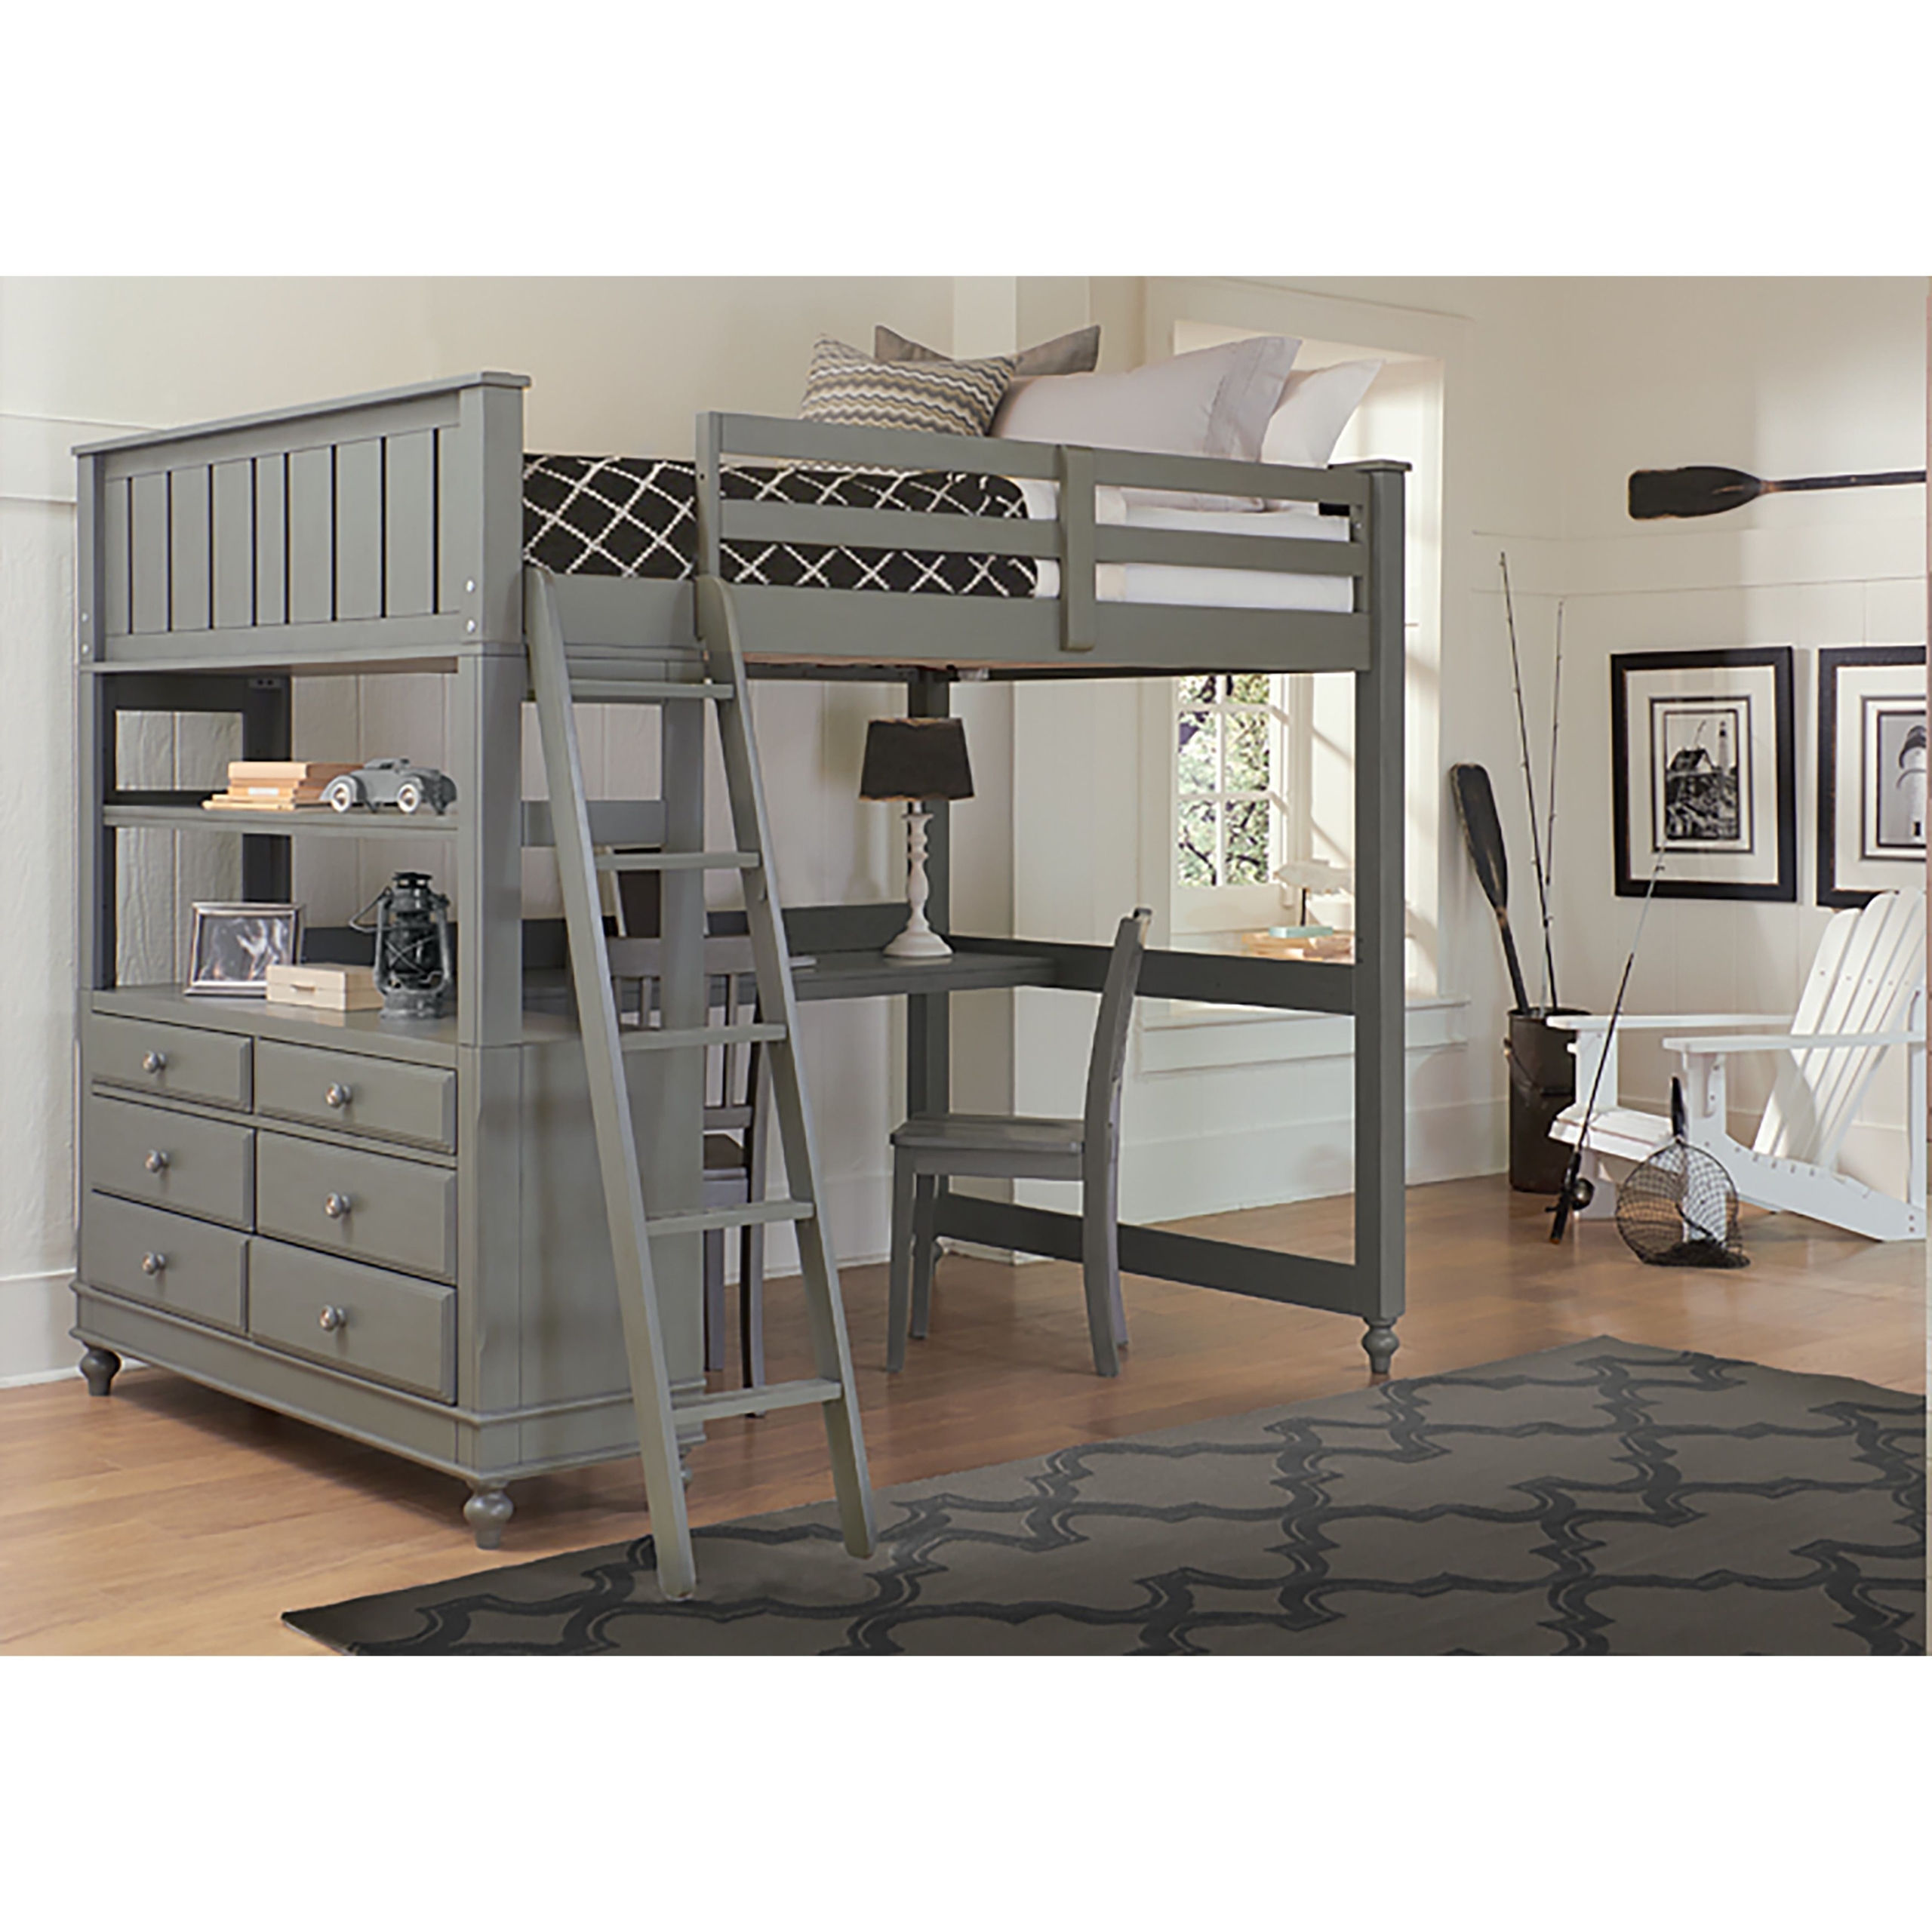 Bunk beds with desk and drawers